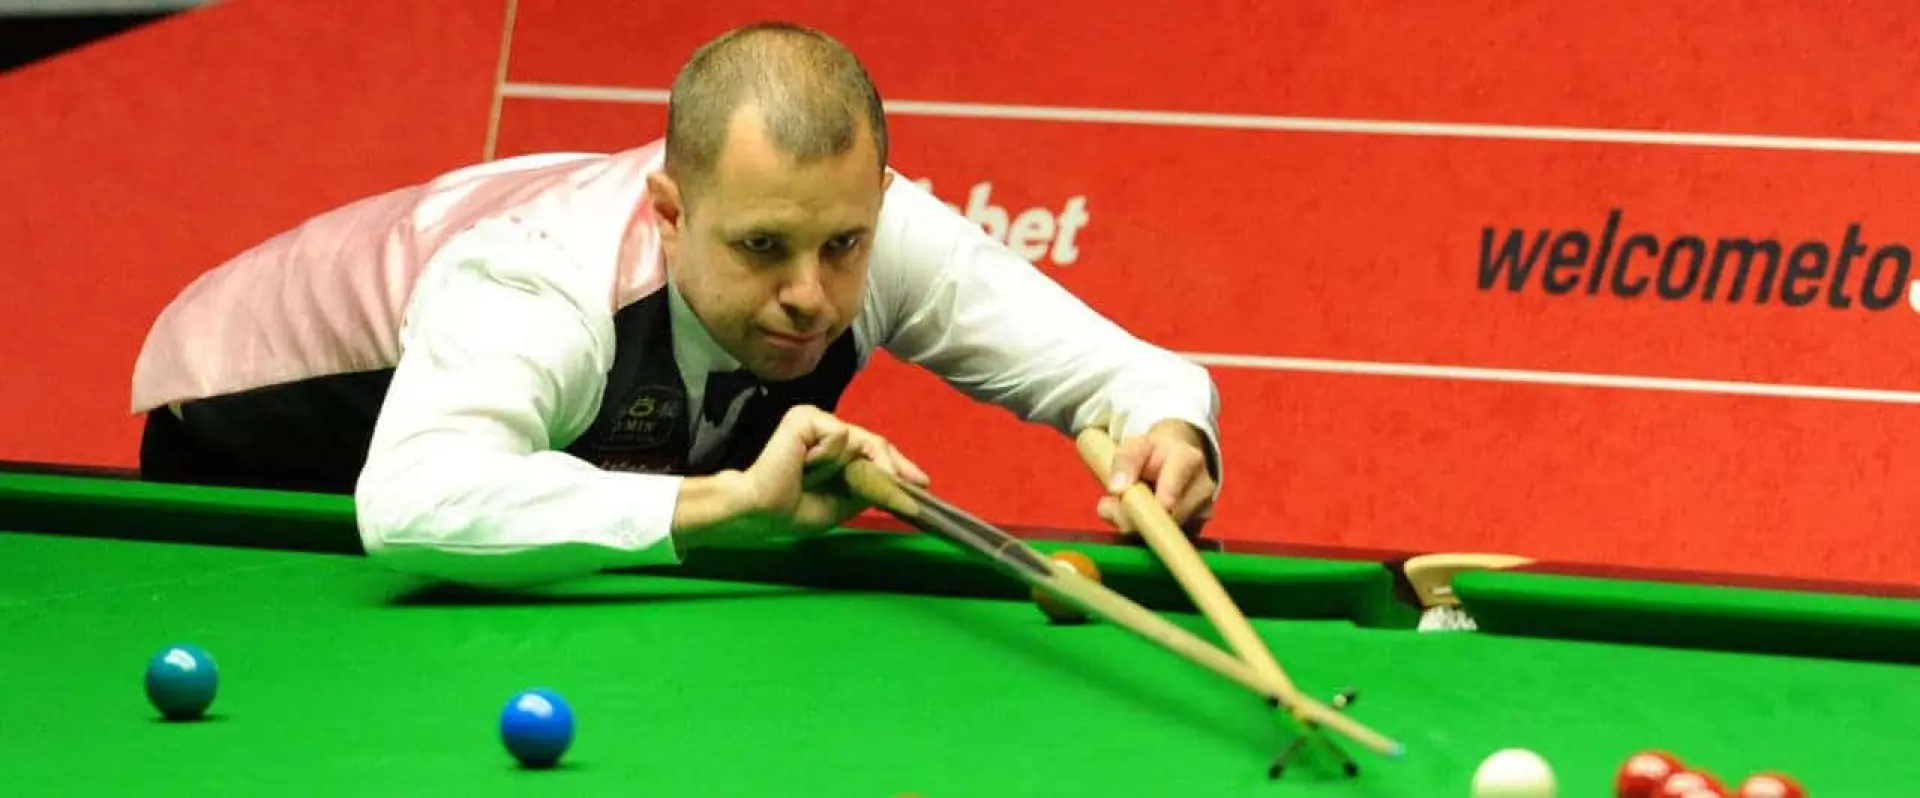 Hawkins v Hamilton bets join King v Wilson odds to form Coral Northern Ireland Open semis tips from the sponsors.